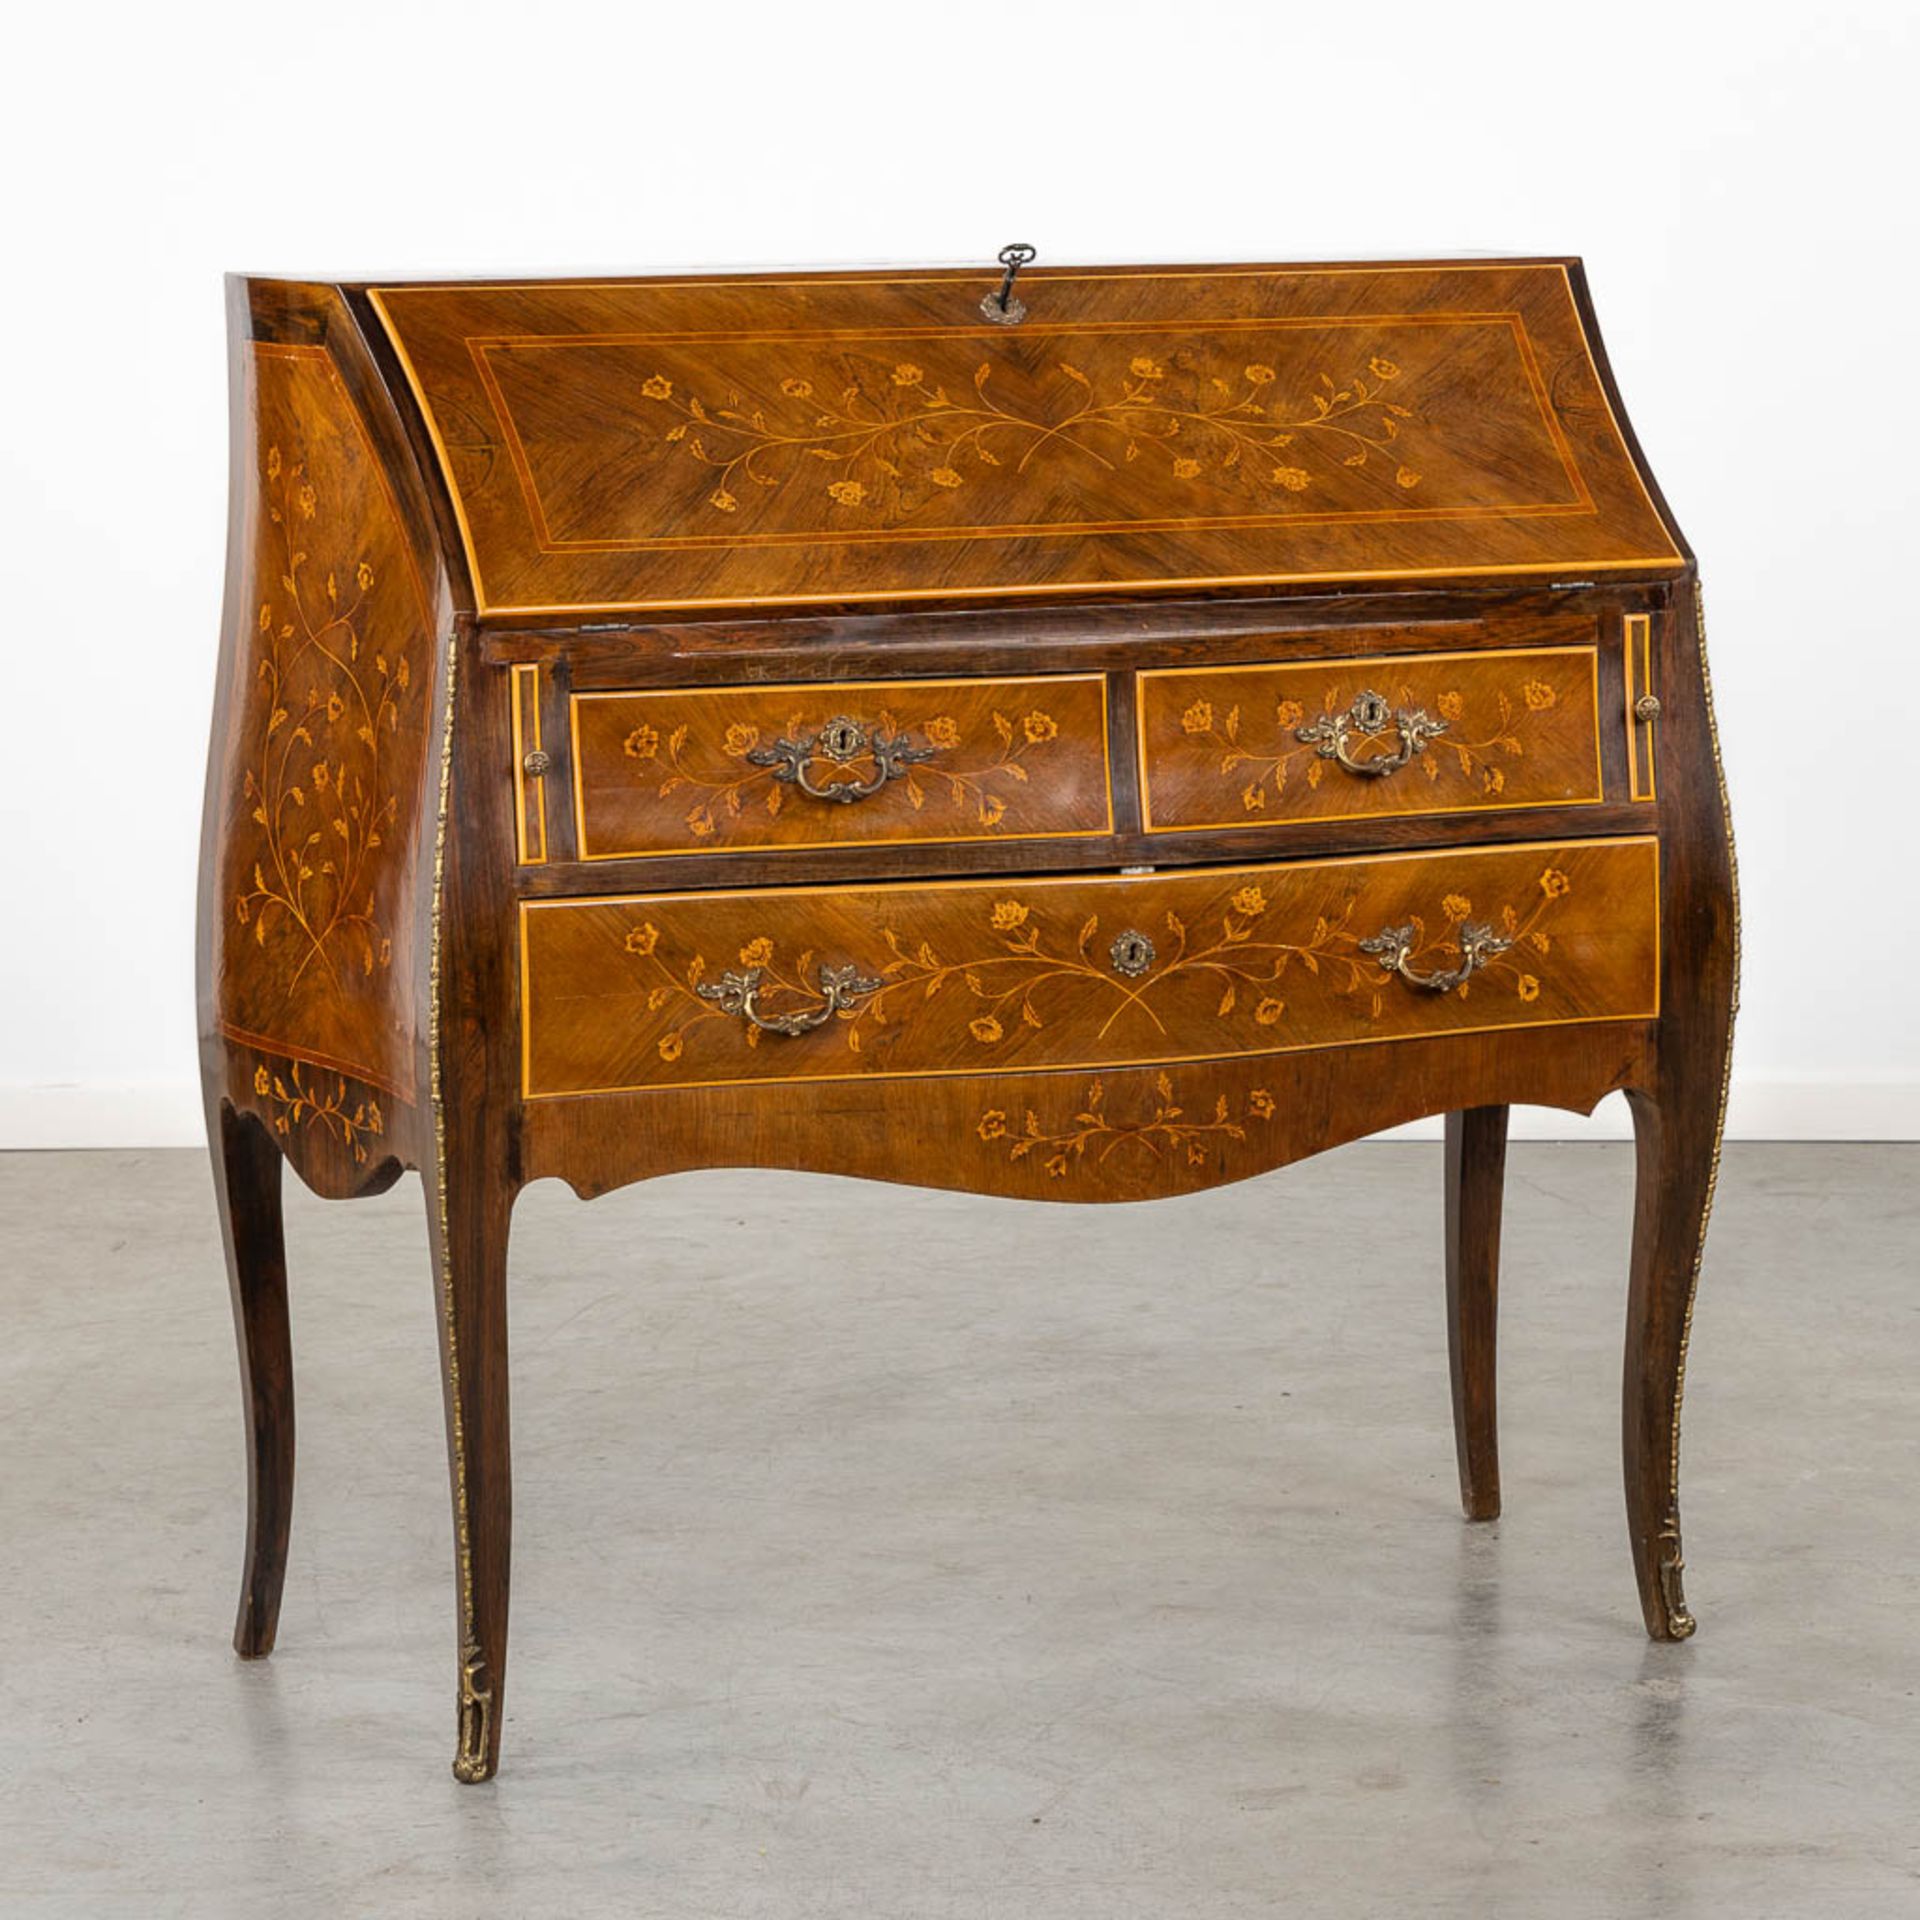 A secretaire, marquetry inlay mounted with bronze in Louis XV style. Circa 1970. (L:47 x W:101 x H:1